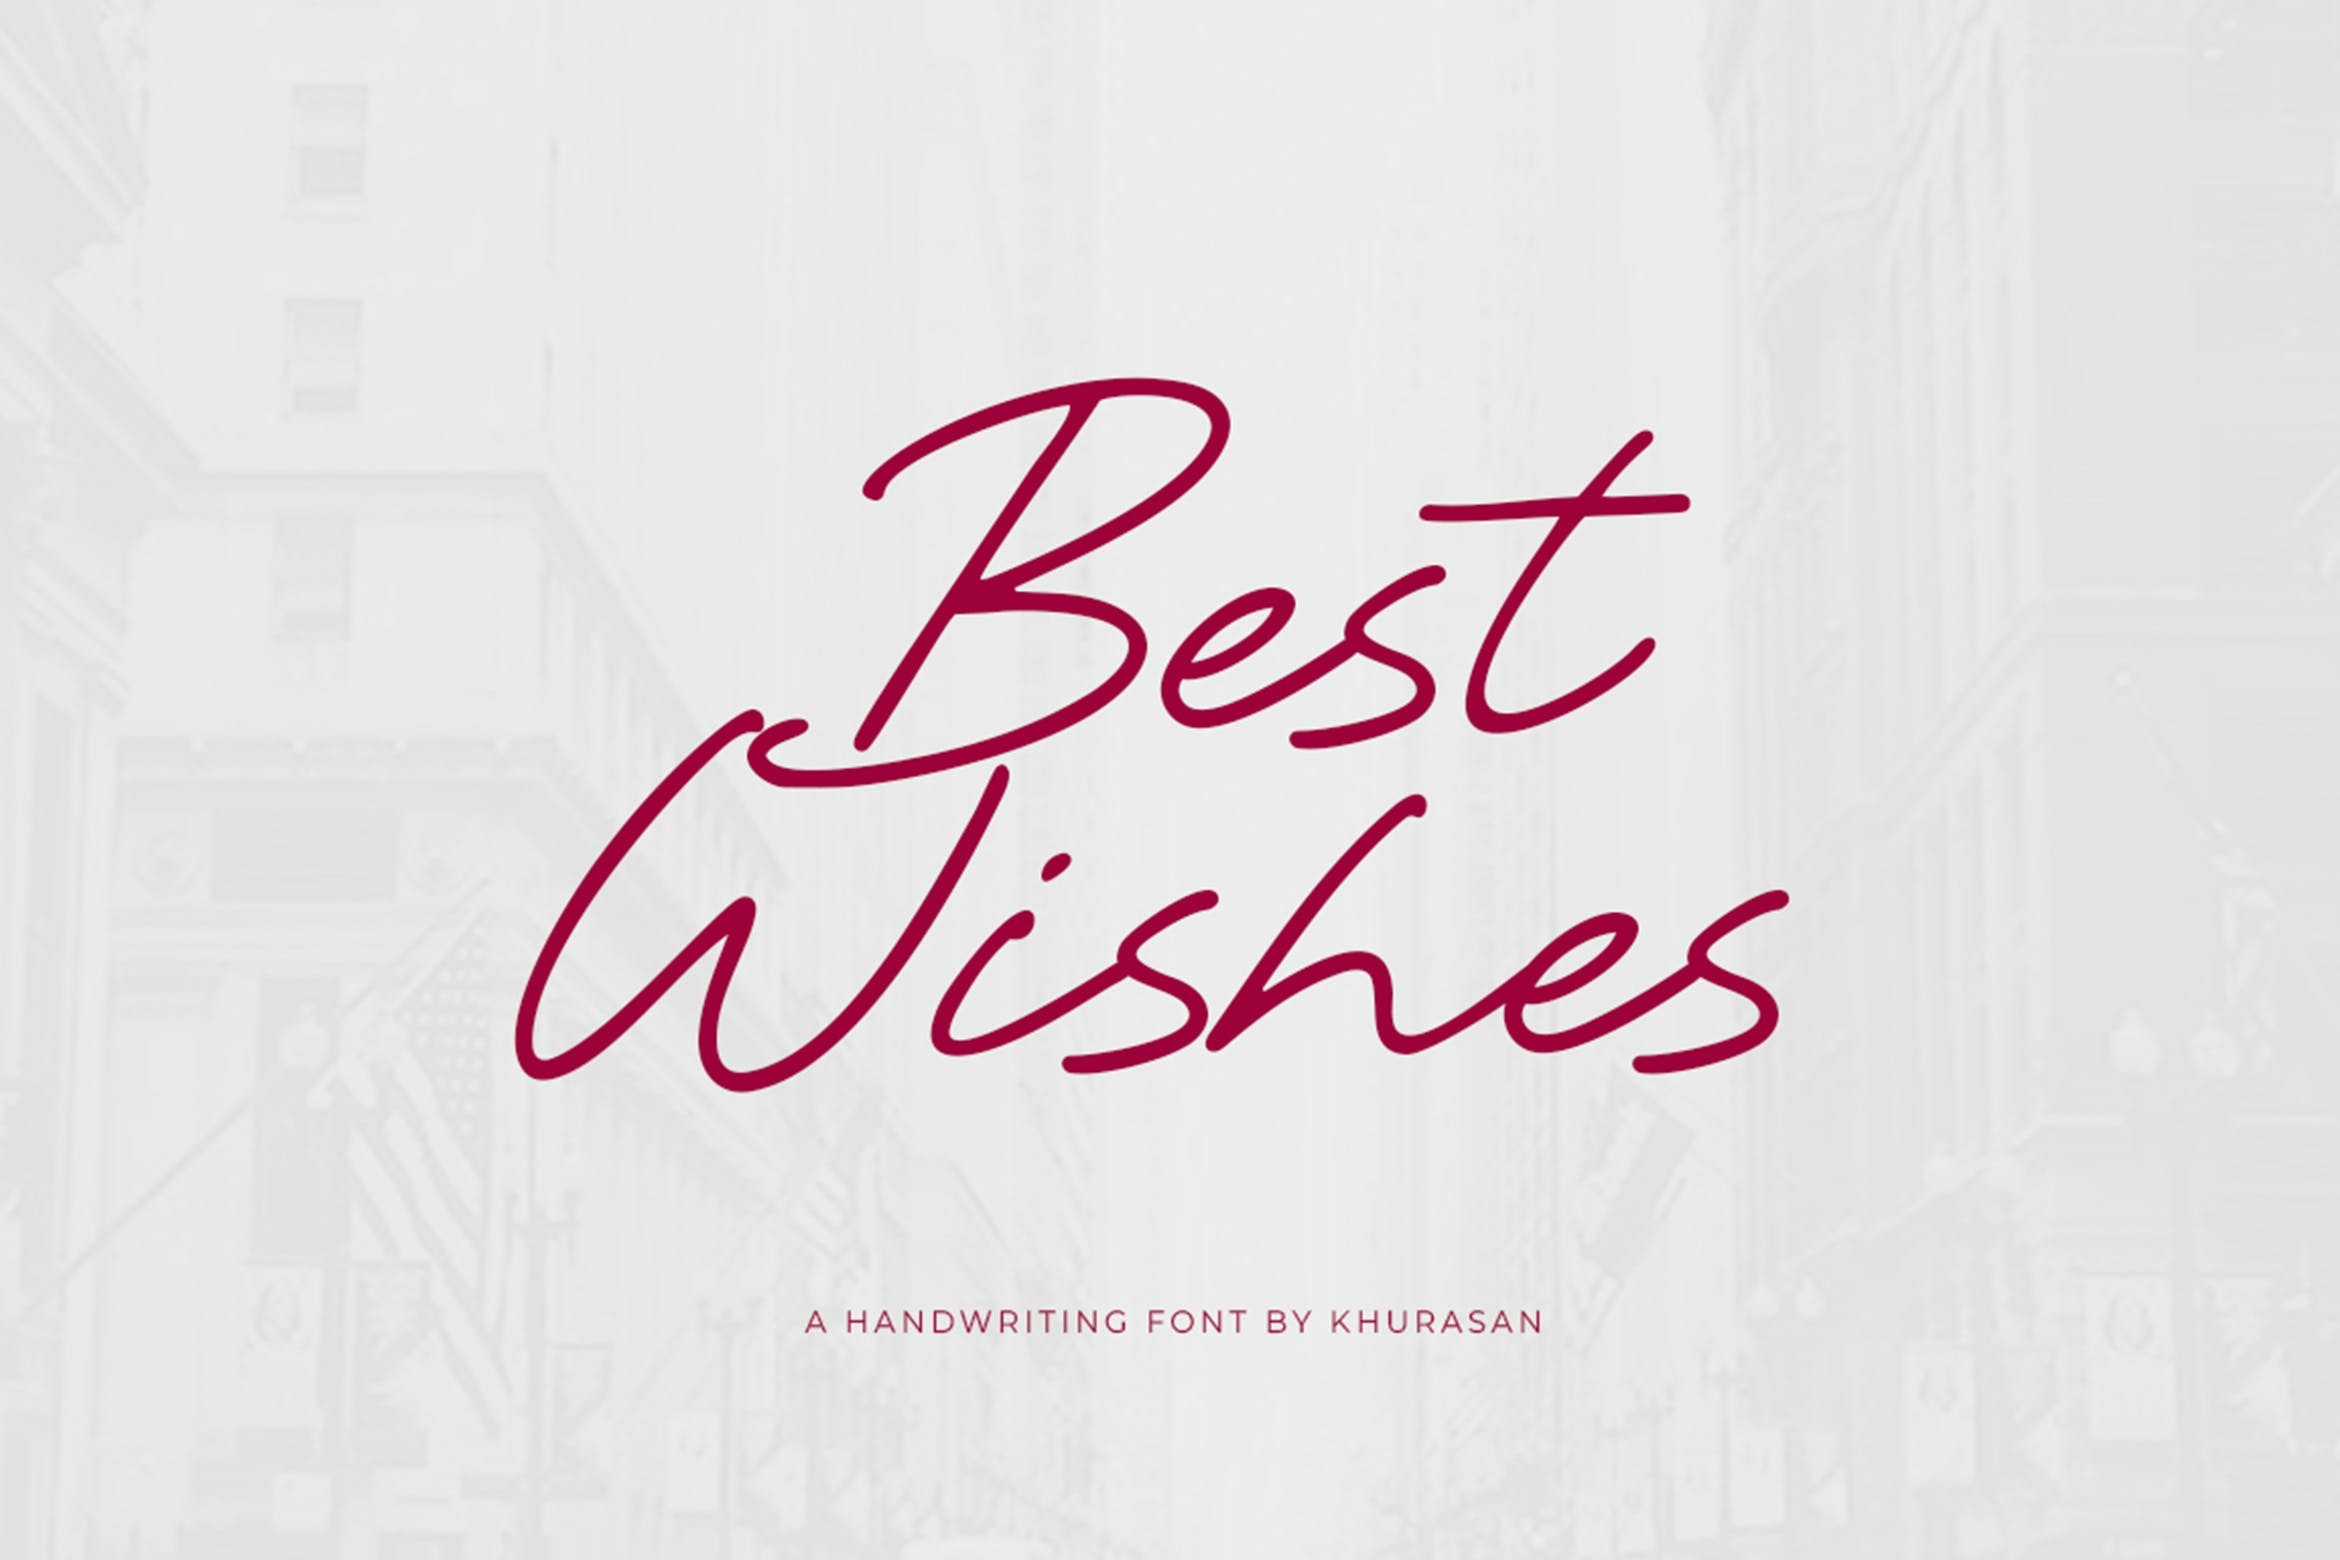 Шрифт Best Wishes